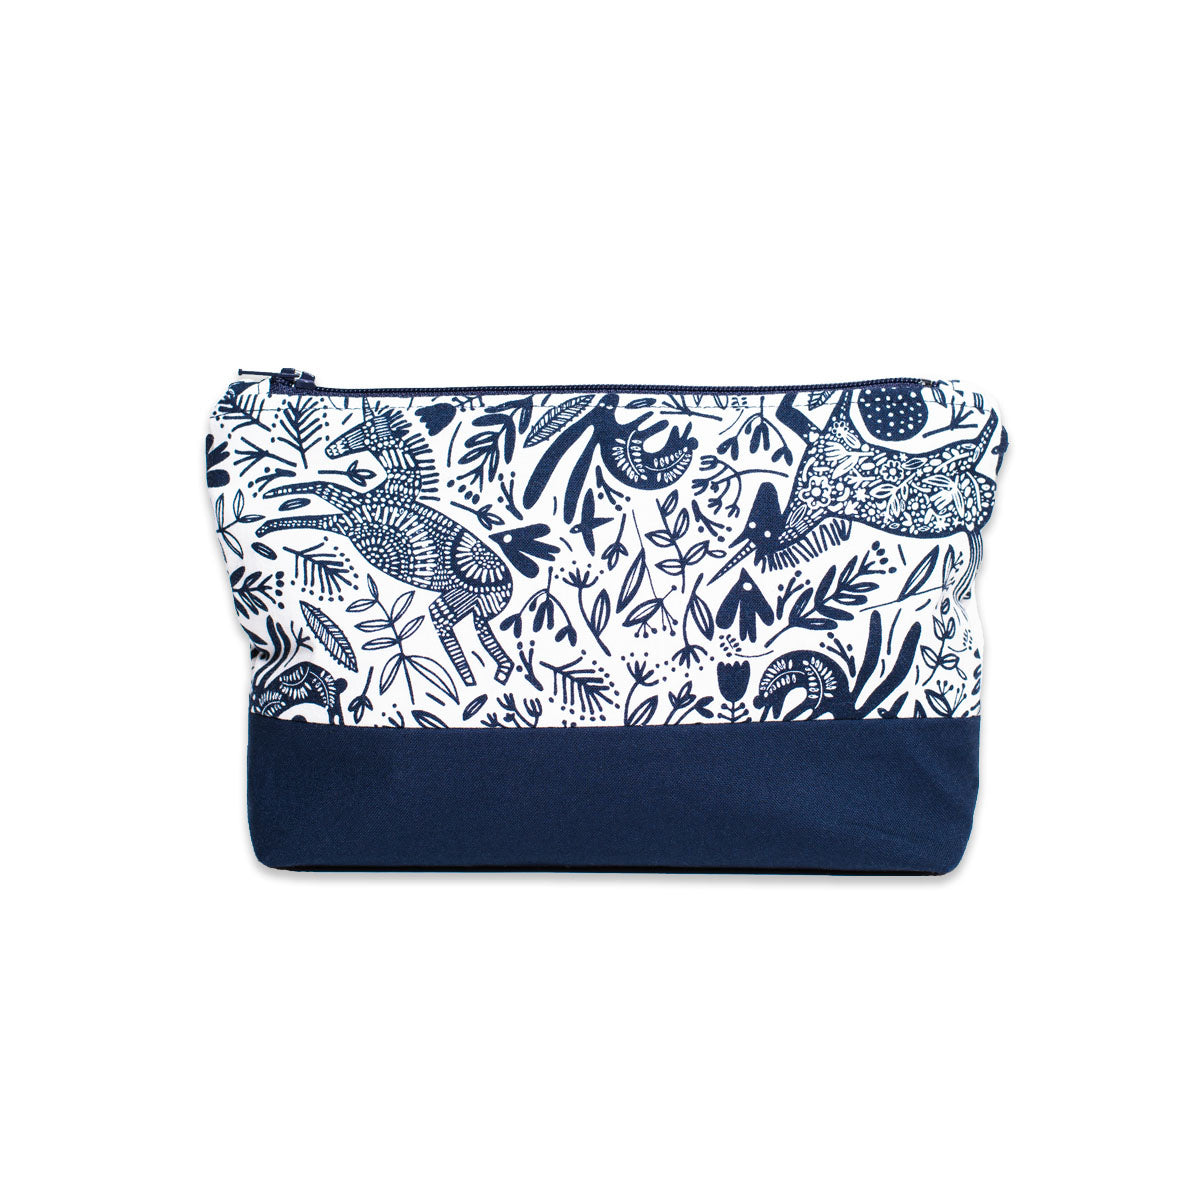 100% cotton navy and blue zip featuring whimsical forest illustration pattern 